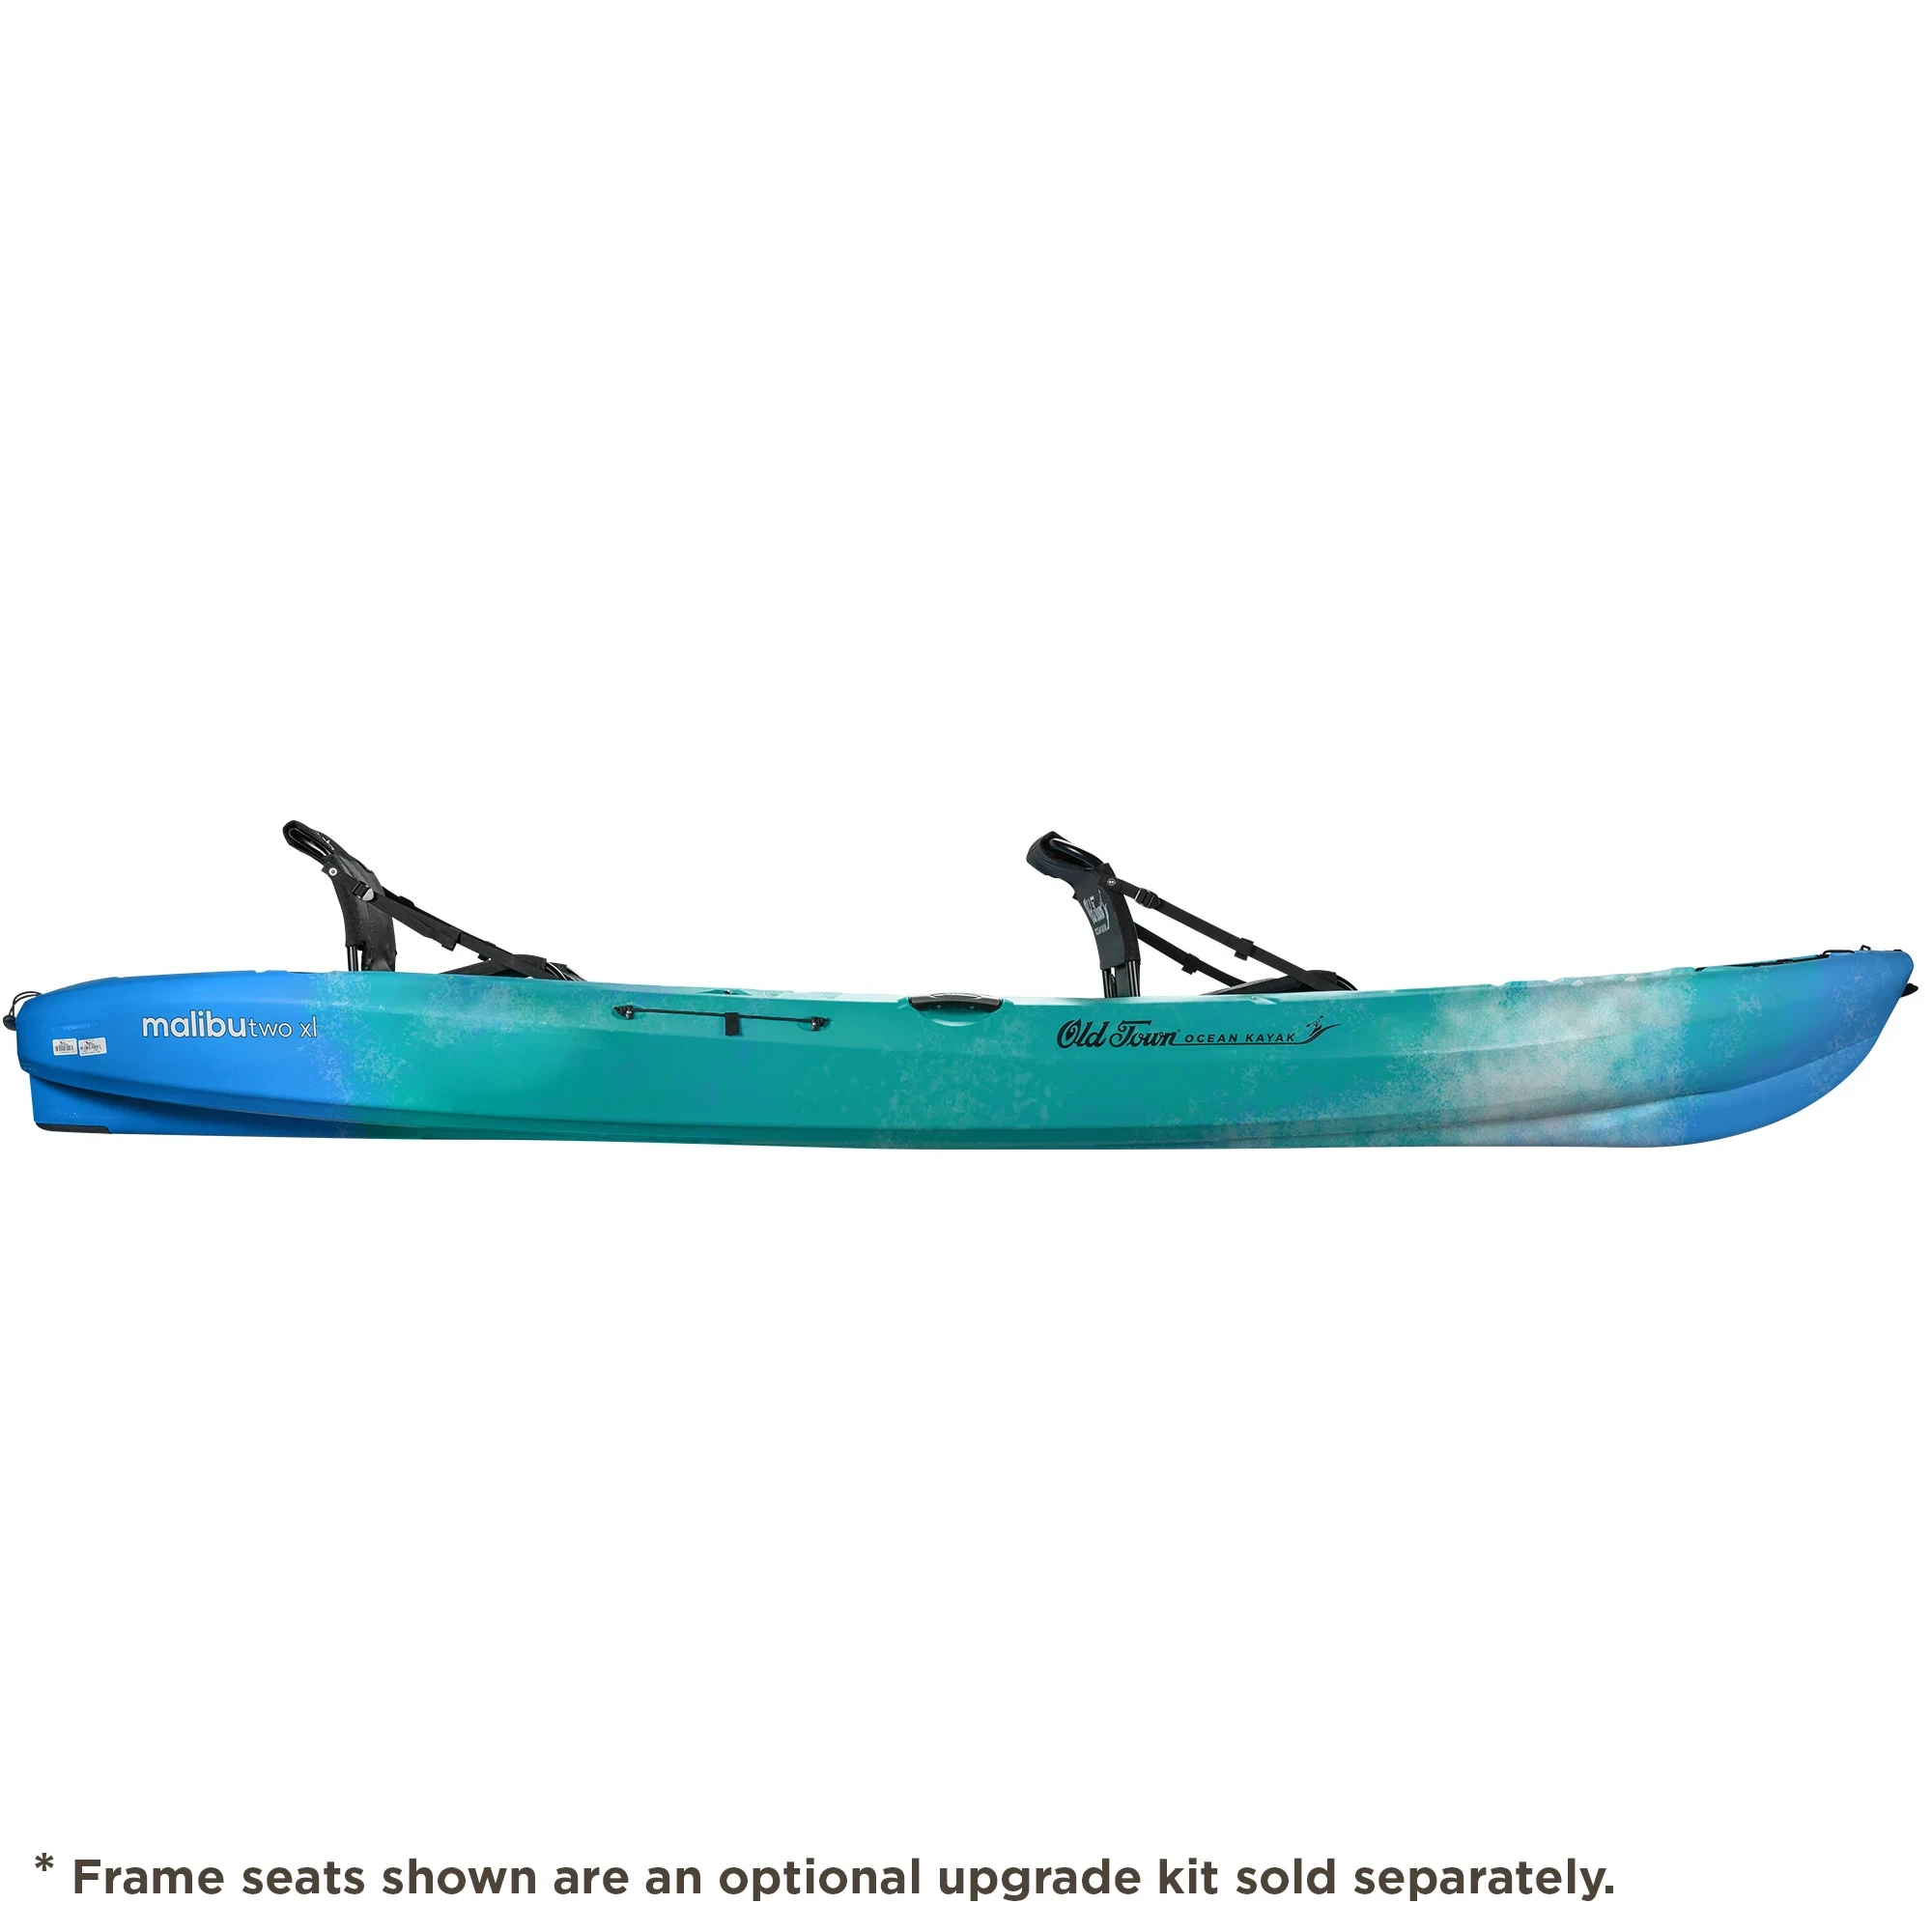 Ocean Kayak Malibu Two XL - Seaglass - Side View with frame seat upgrade